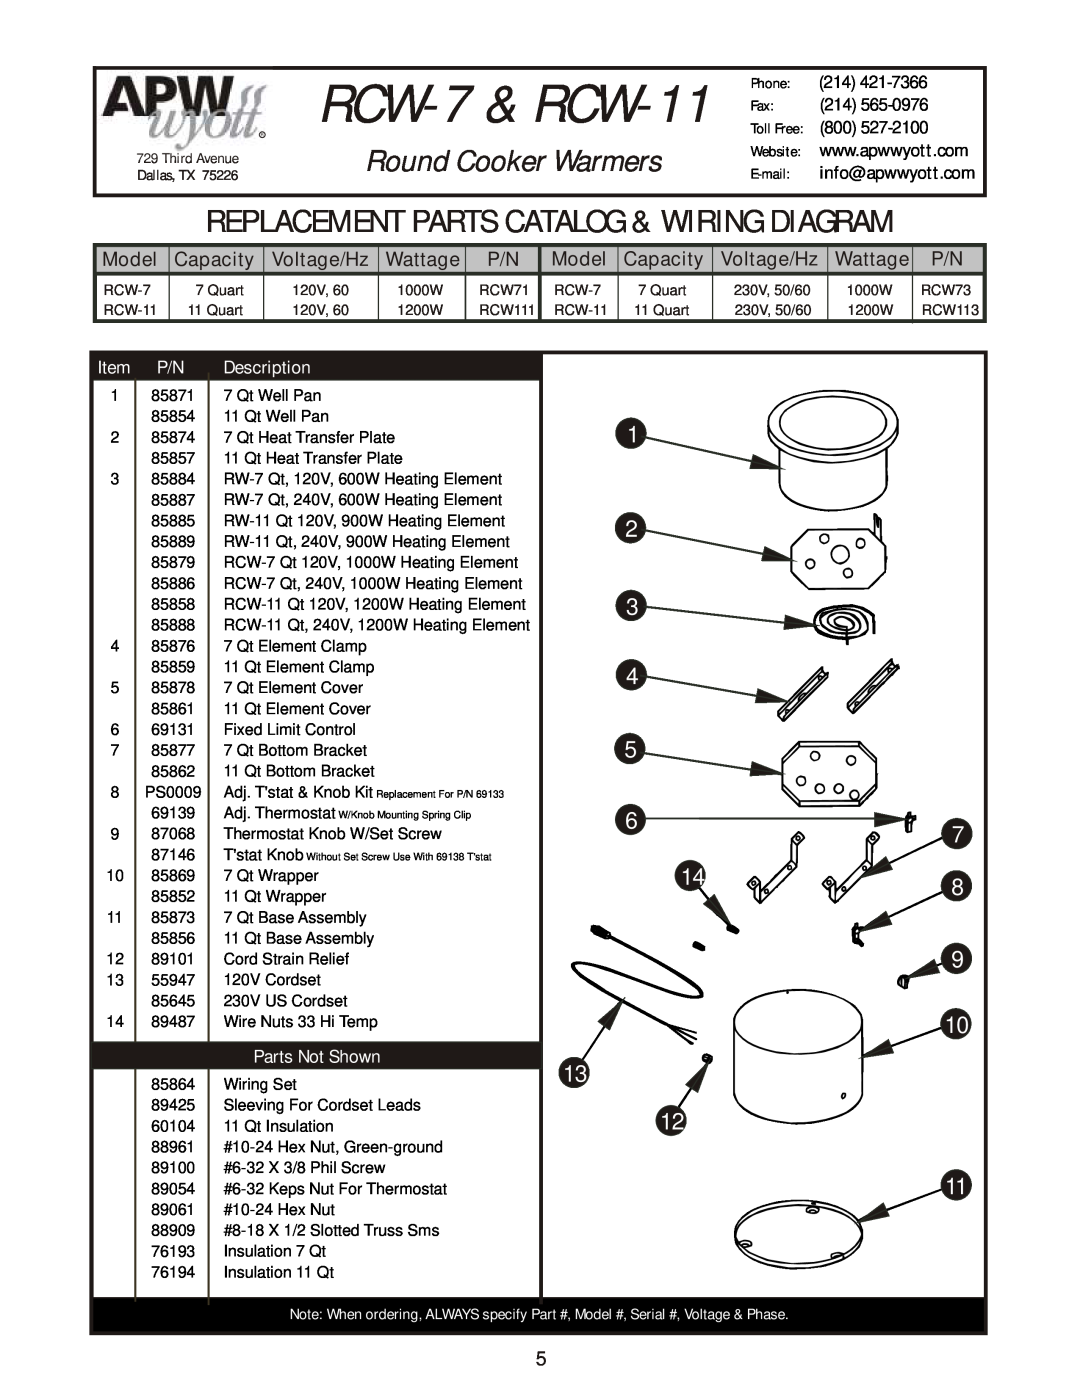 APW Wyott RCW - 11 manual RCW-7 & RCW-11, Replacement Parts Catalog & Wiring Diagram, Round Cooker Warmers, Model, Capacity 